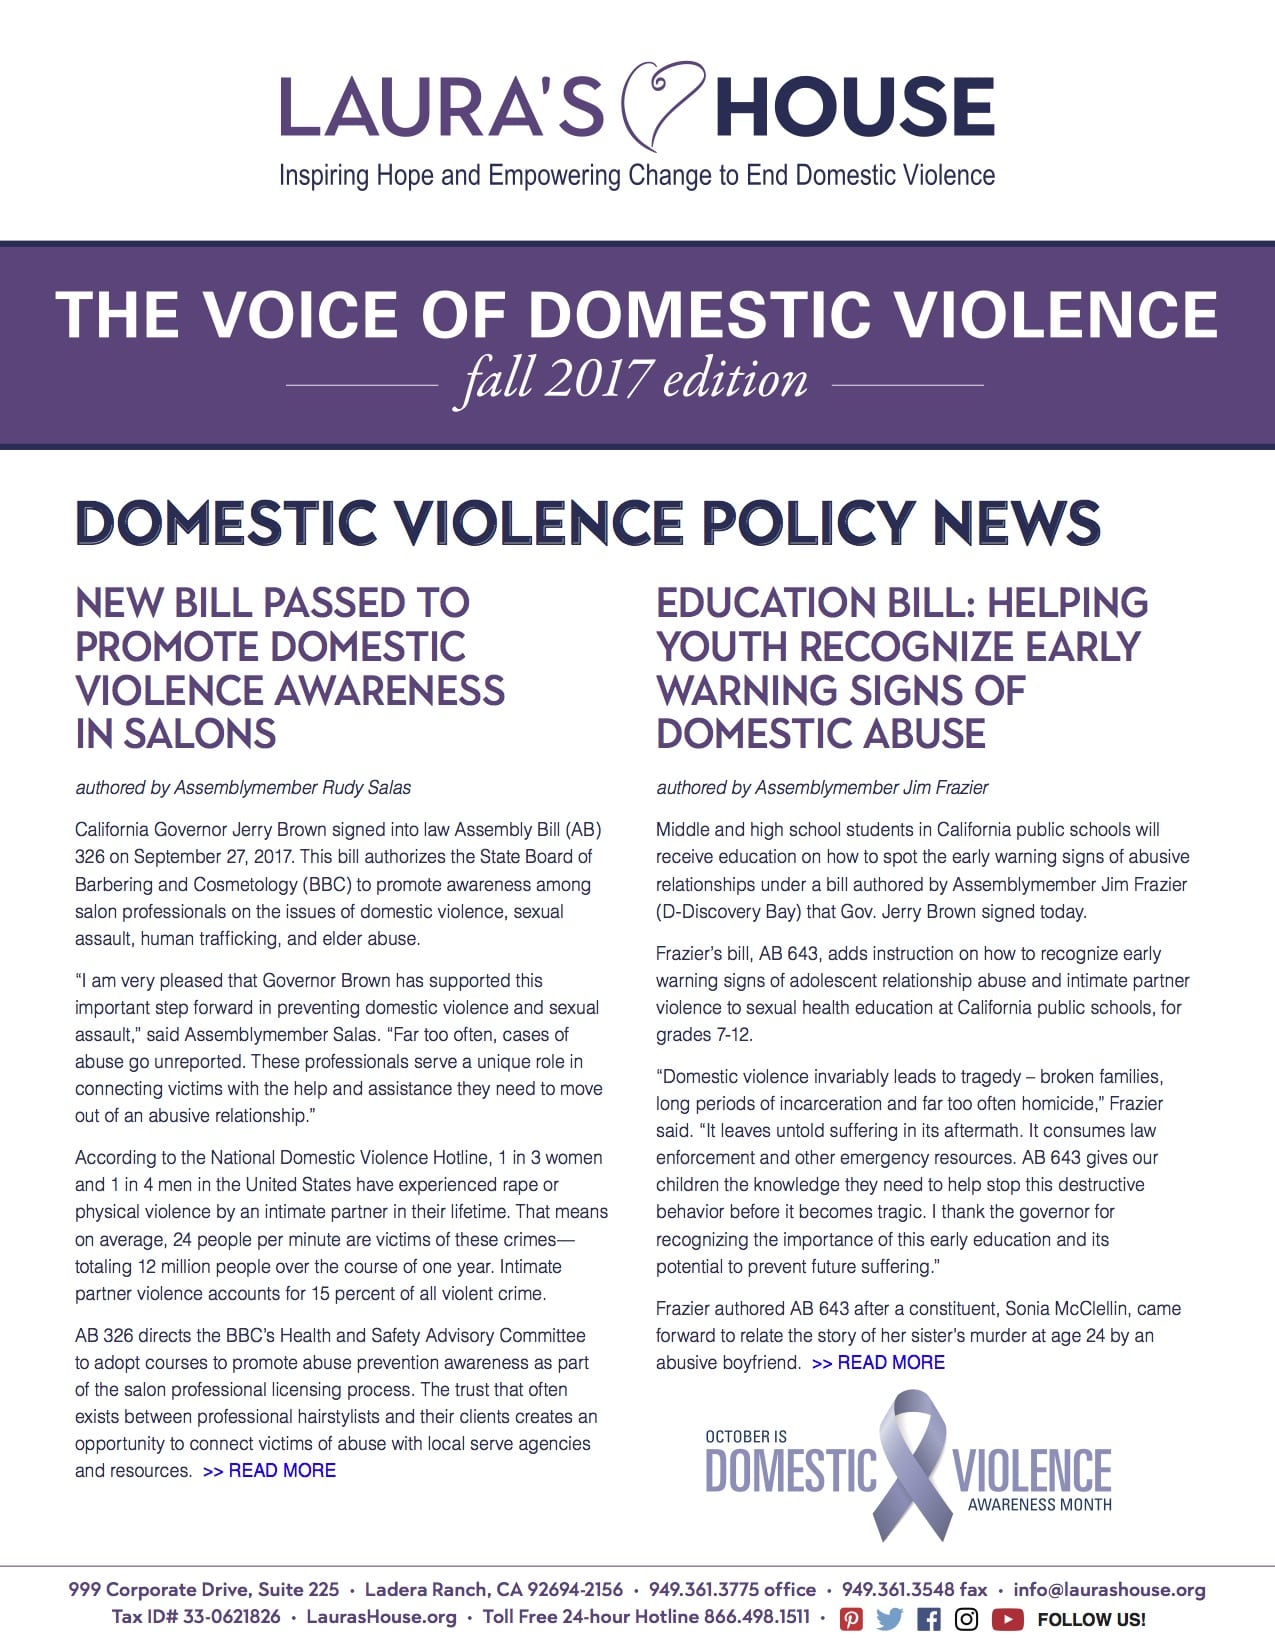 The Voice of Domestic Violence - Fall 2017 edition